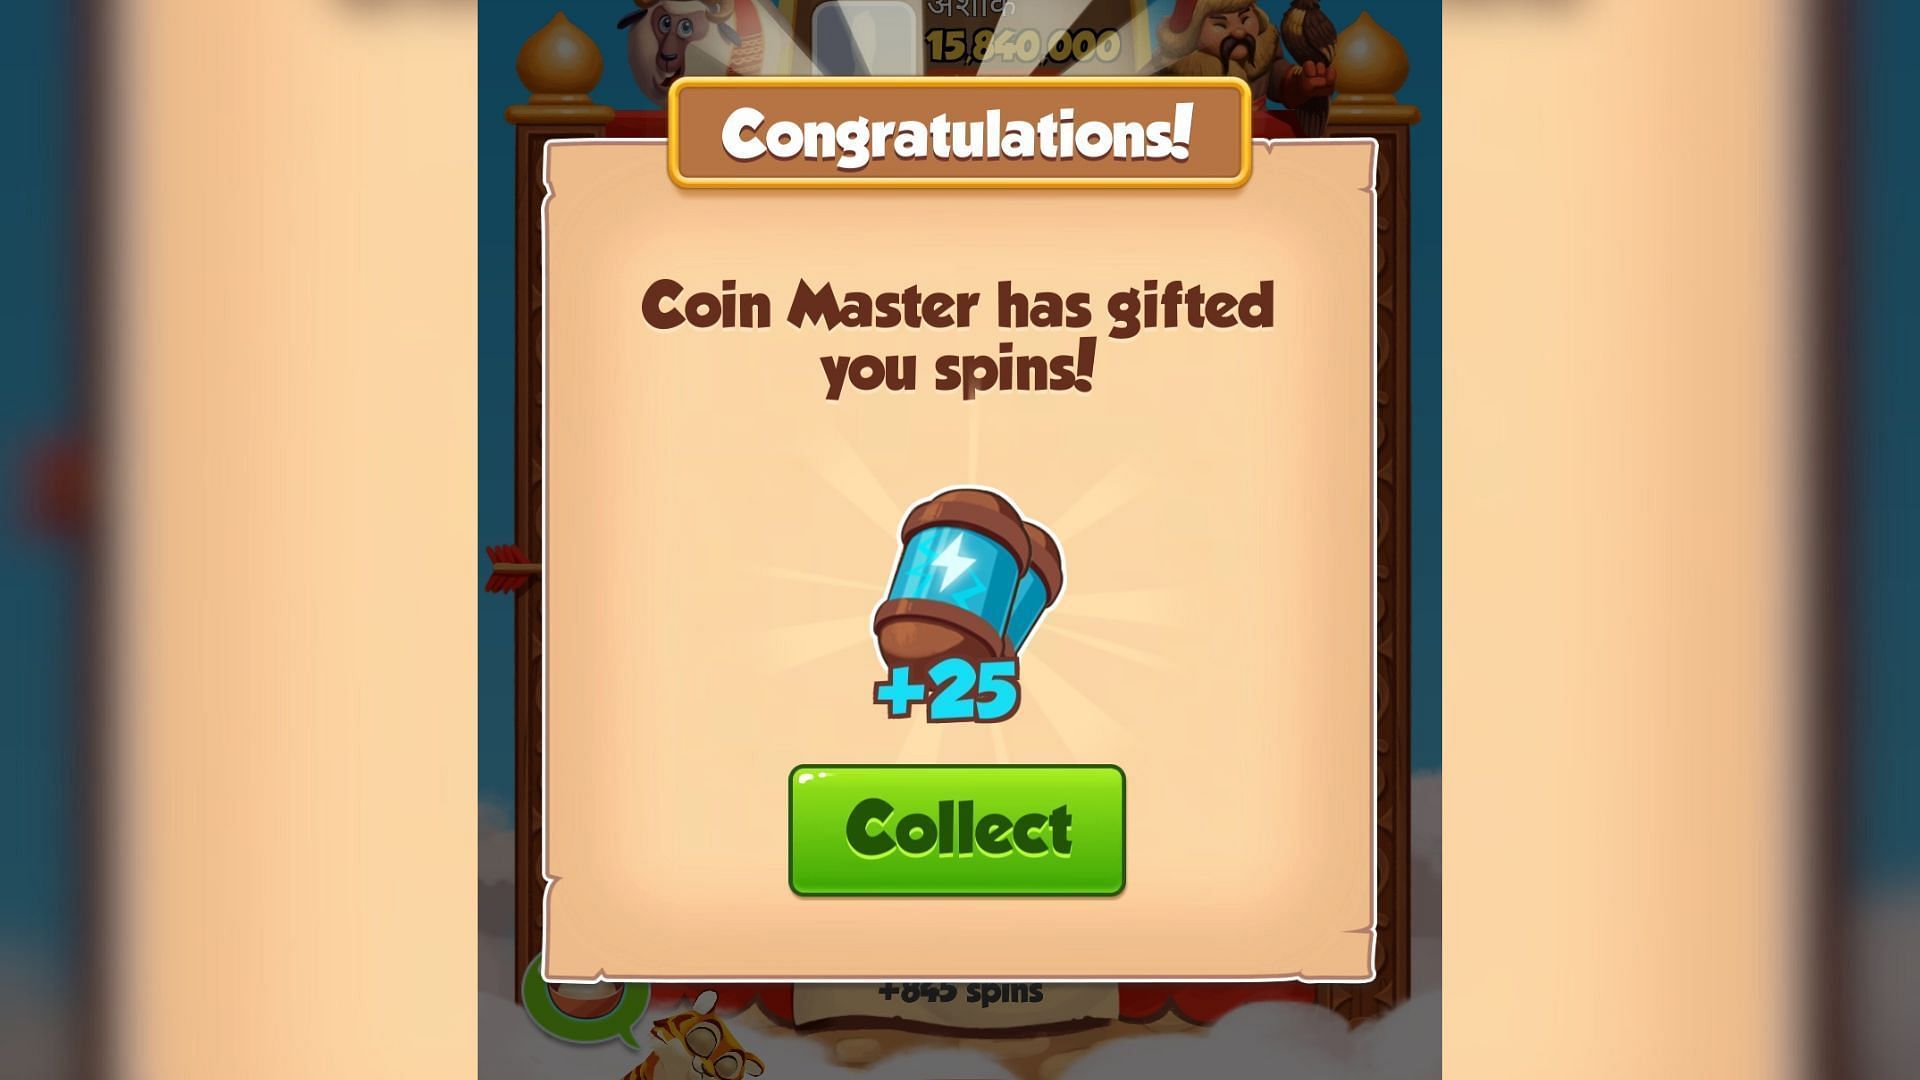 Tap the green Collect button to claim free spins and coins. (Image via Moon Active)